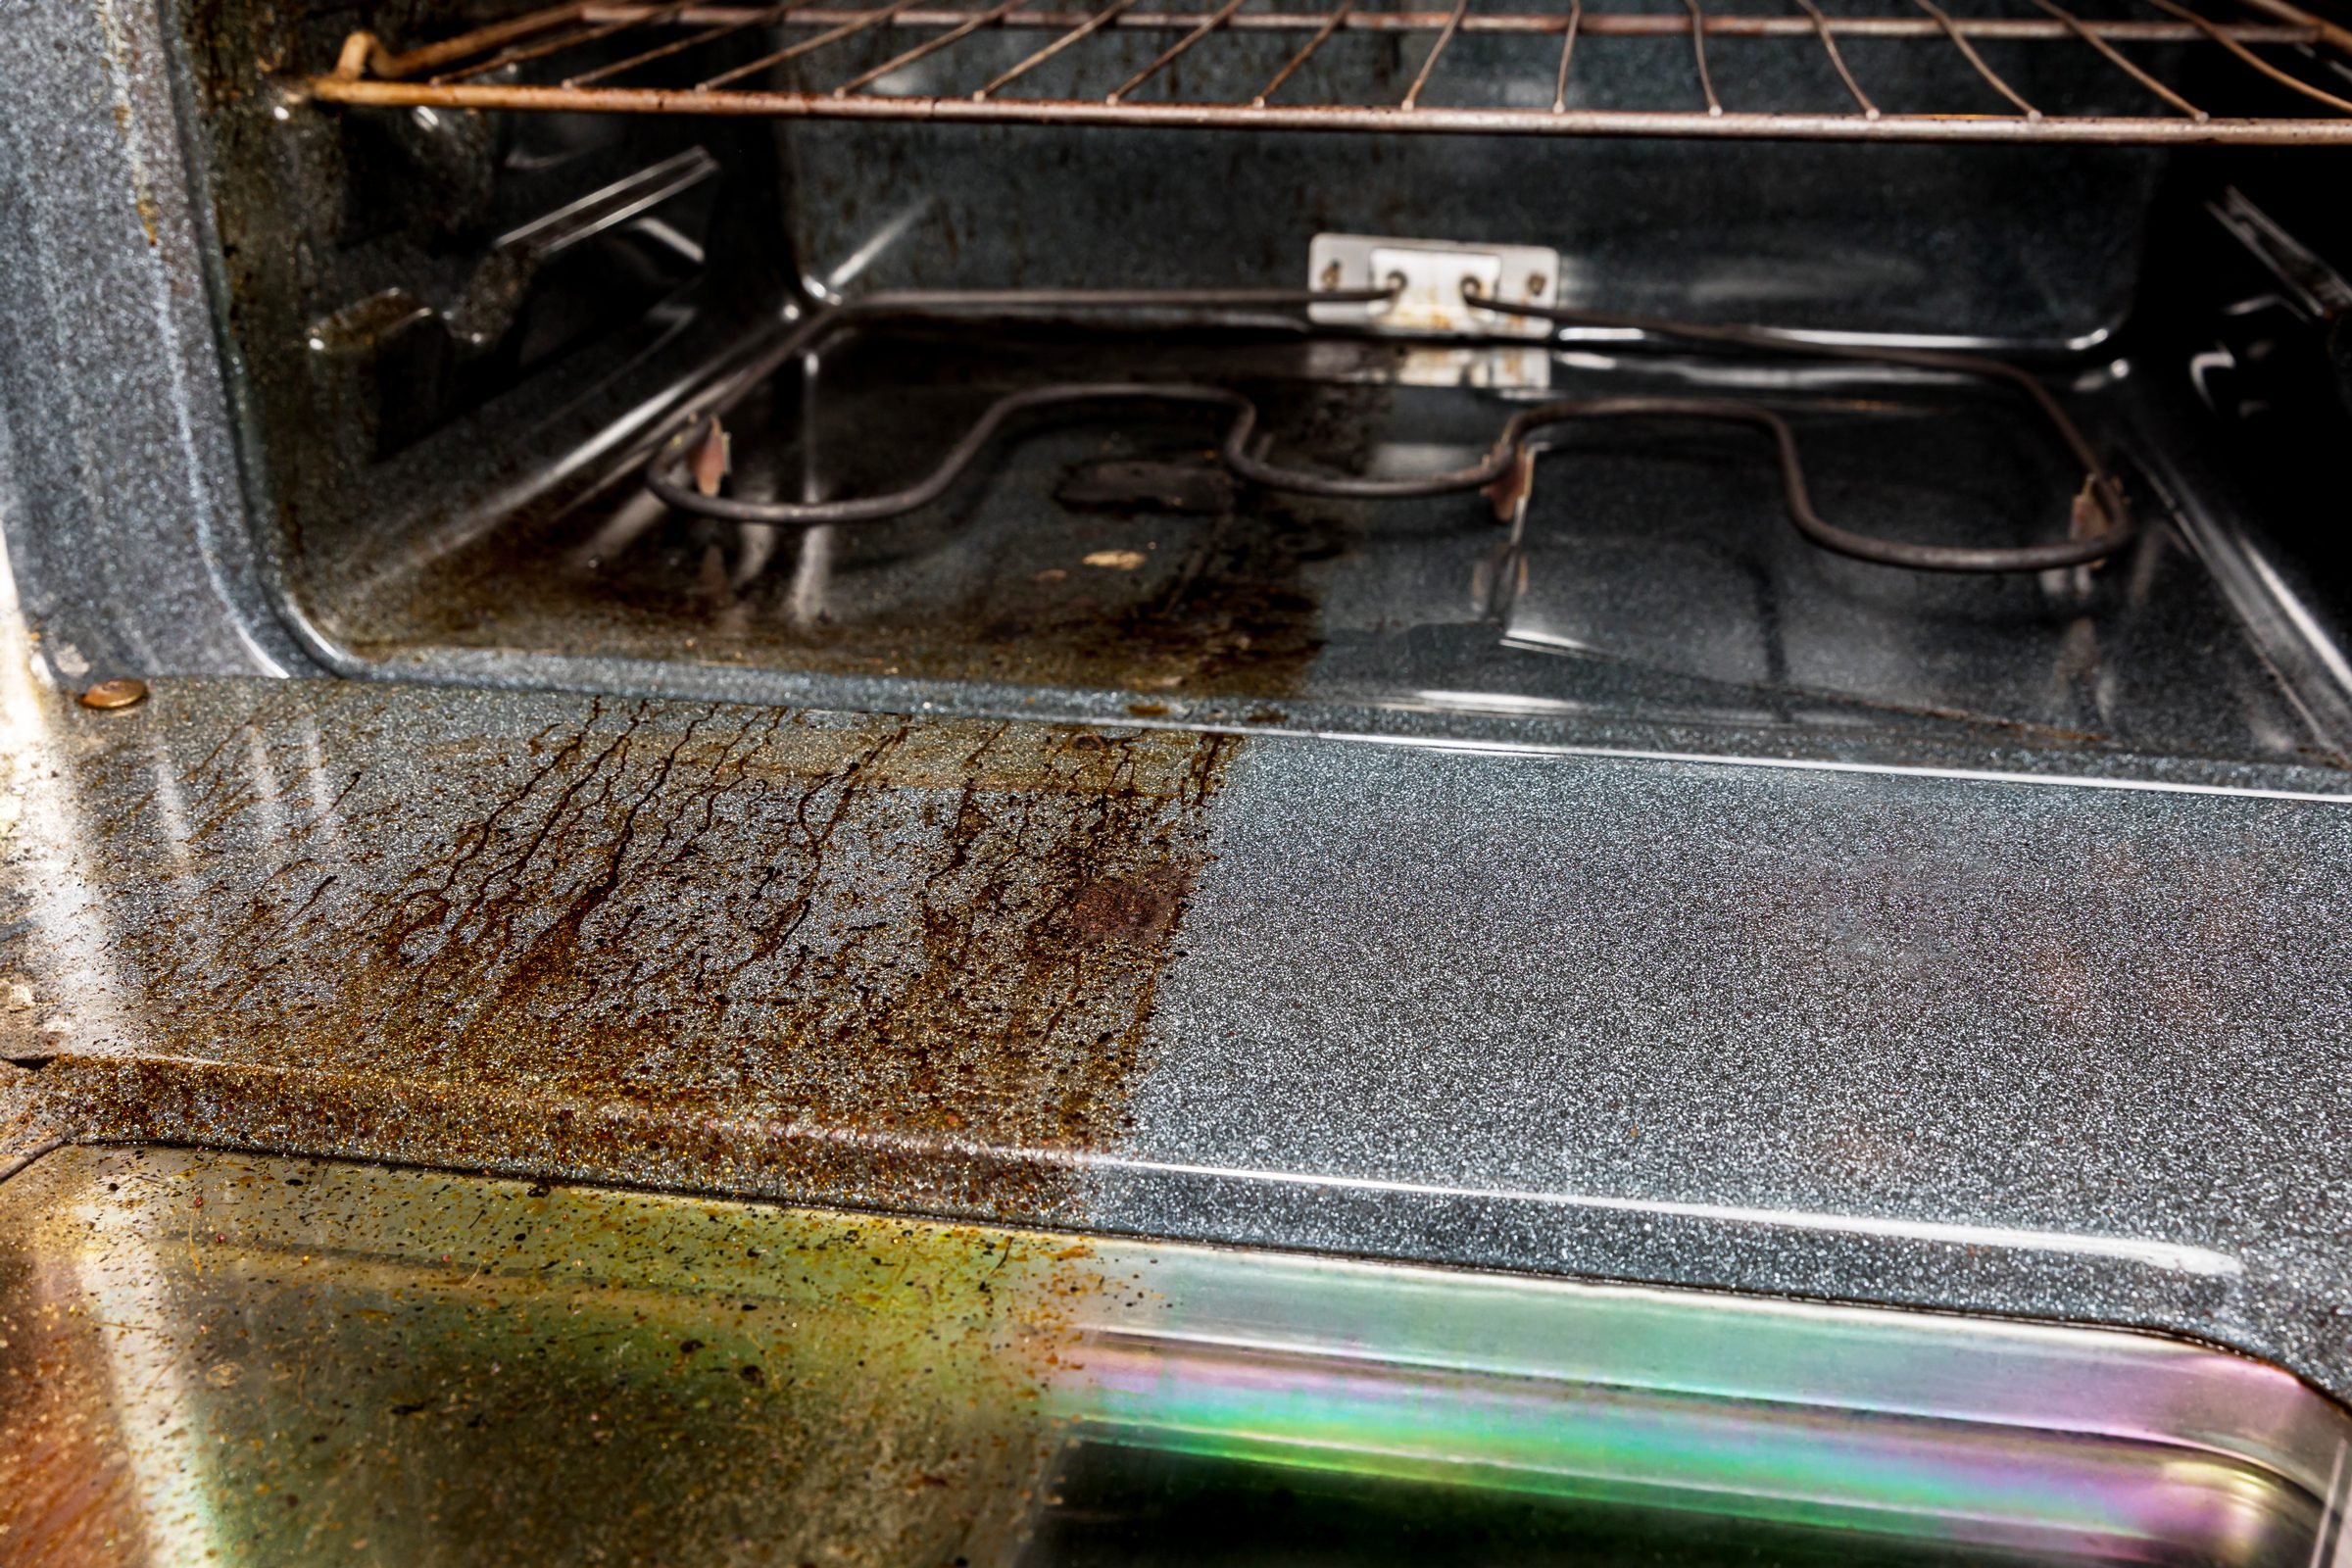 Should You Use the Oven's Self-Cleaning Feature?